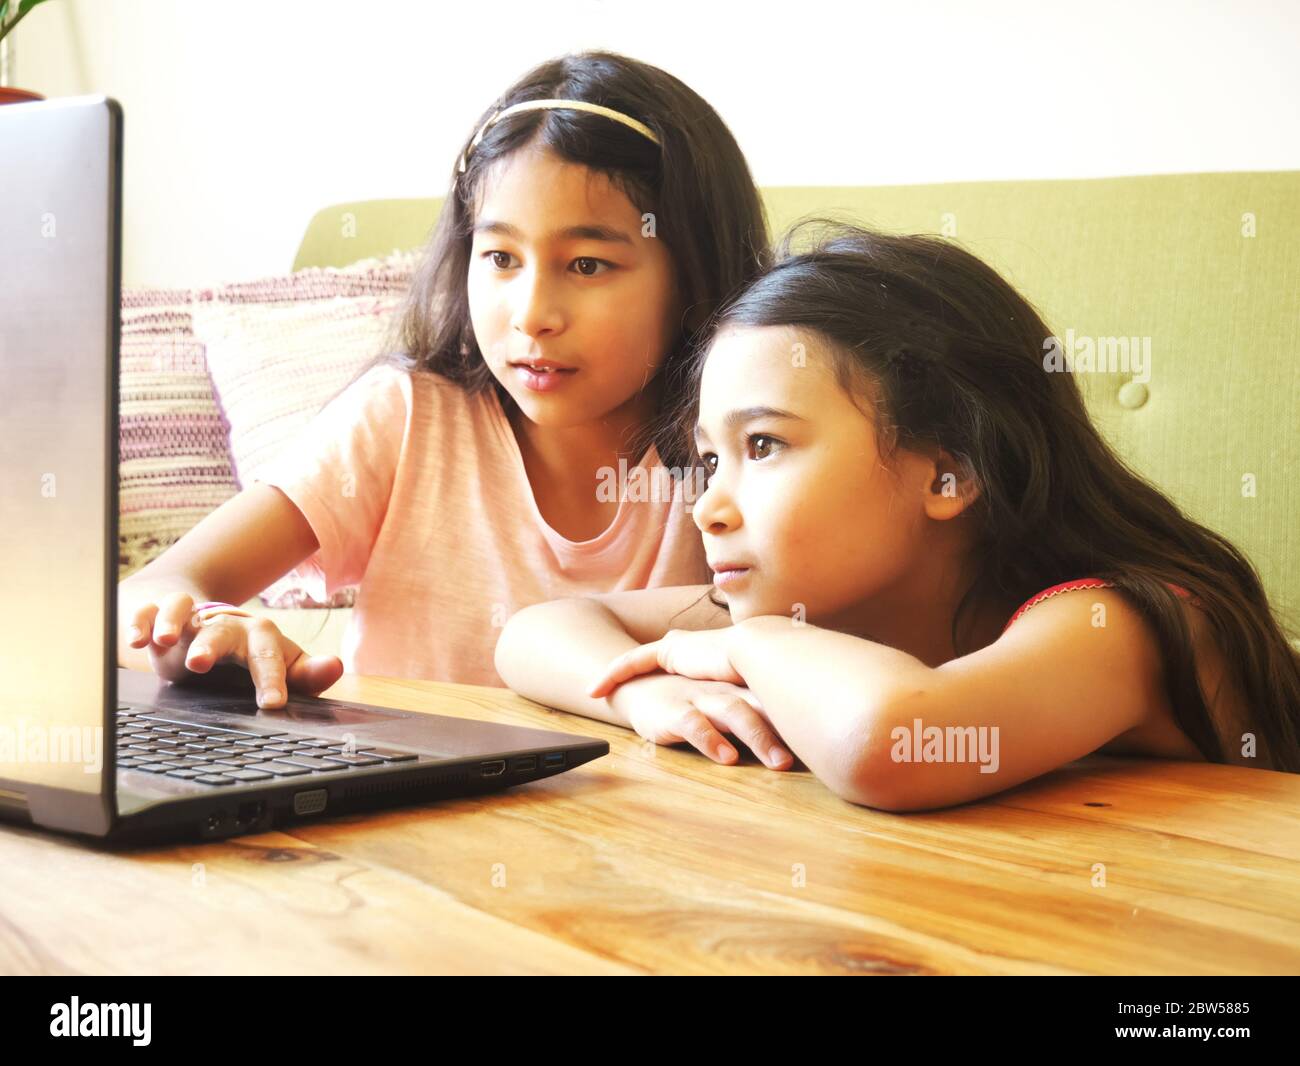 Two Métis girls between the ages of 7 and 9 look at pictures on a laptop screen Stock Photo